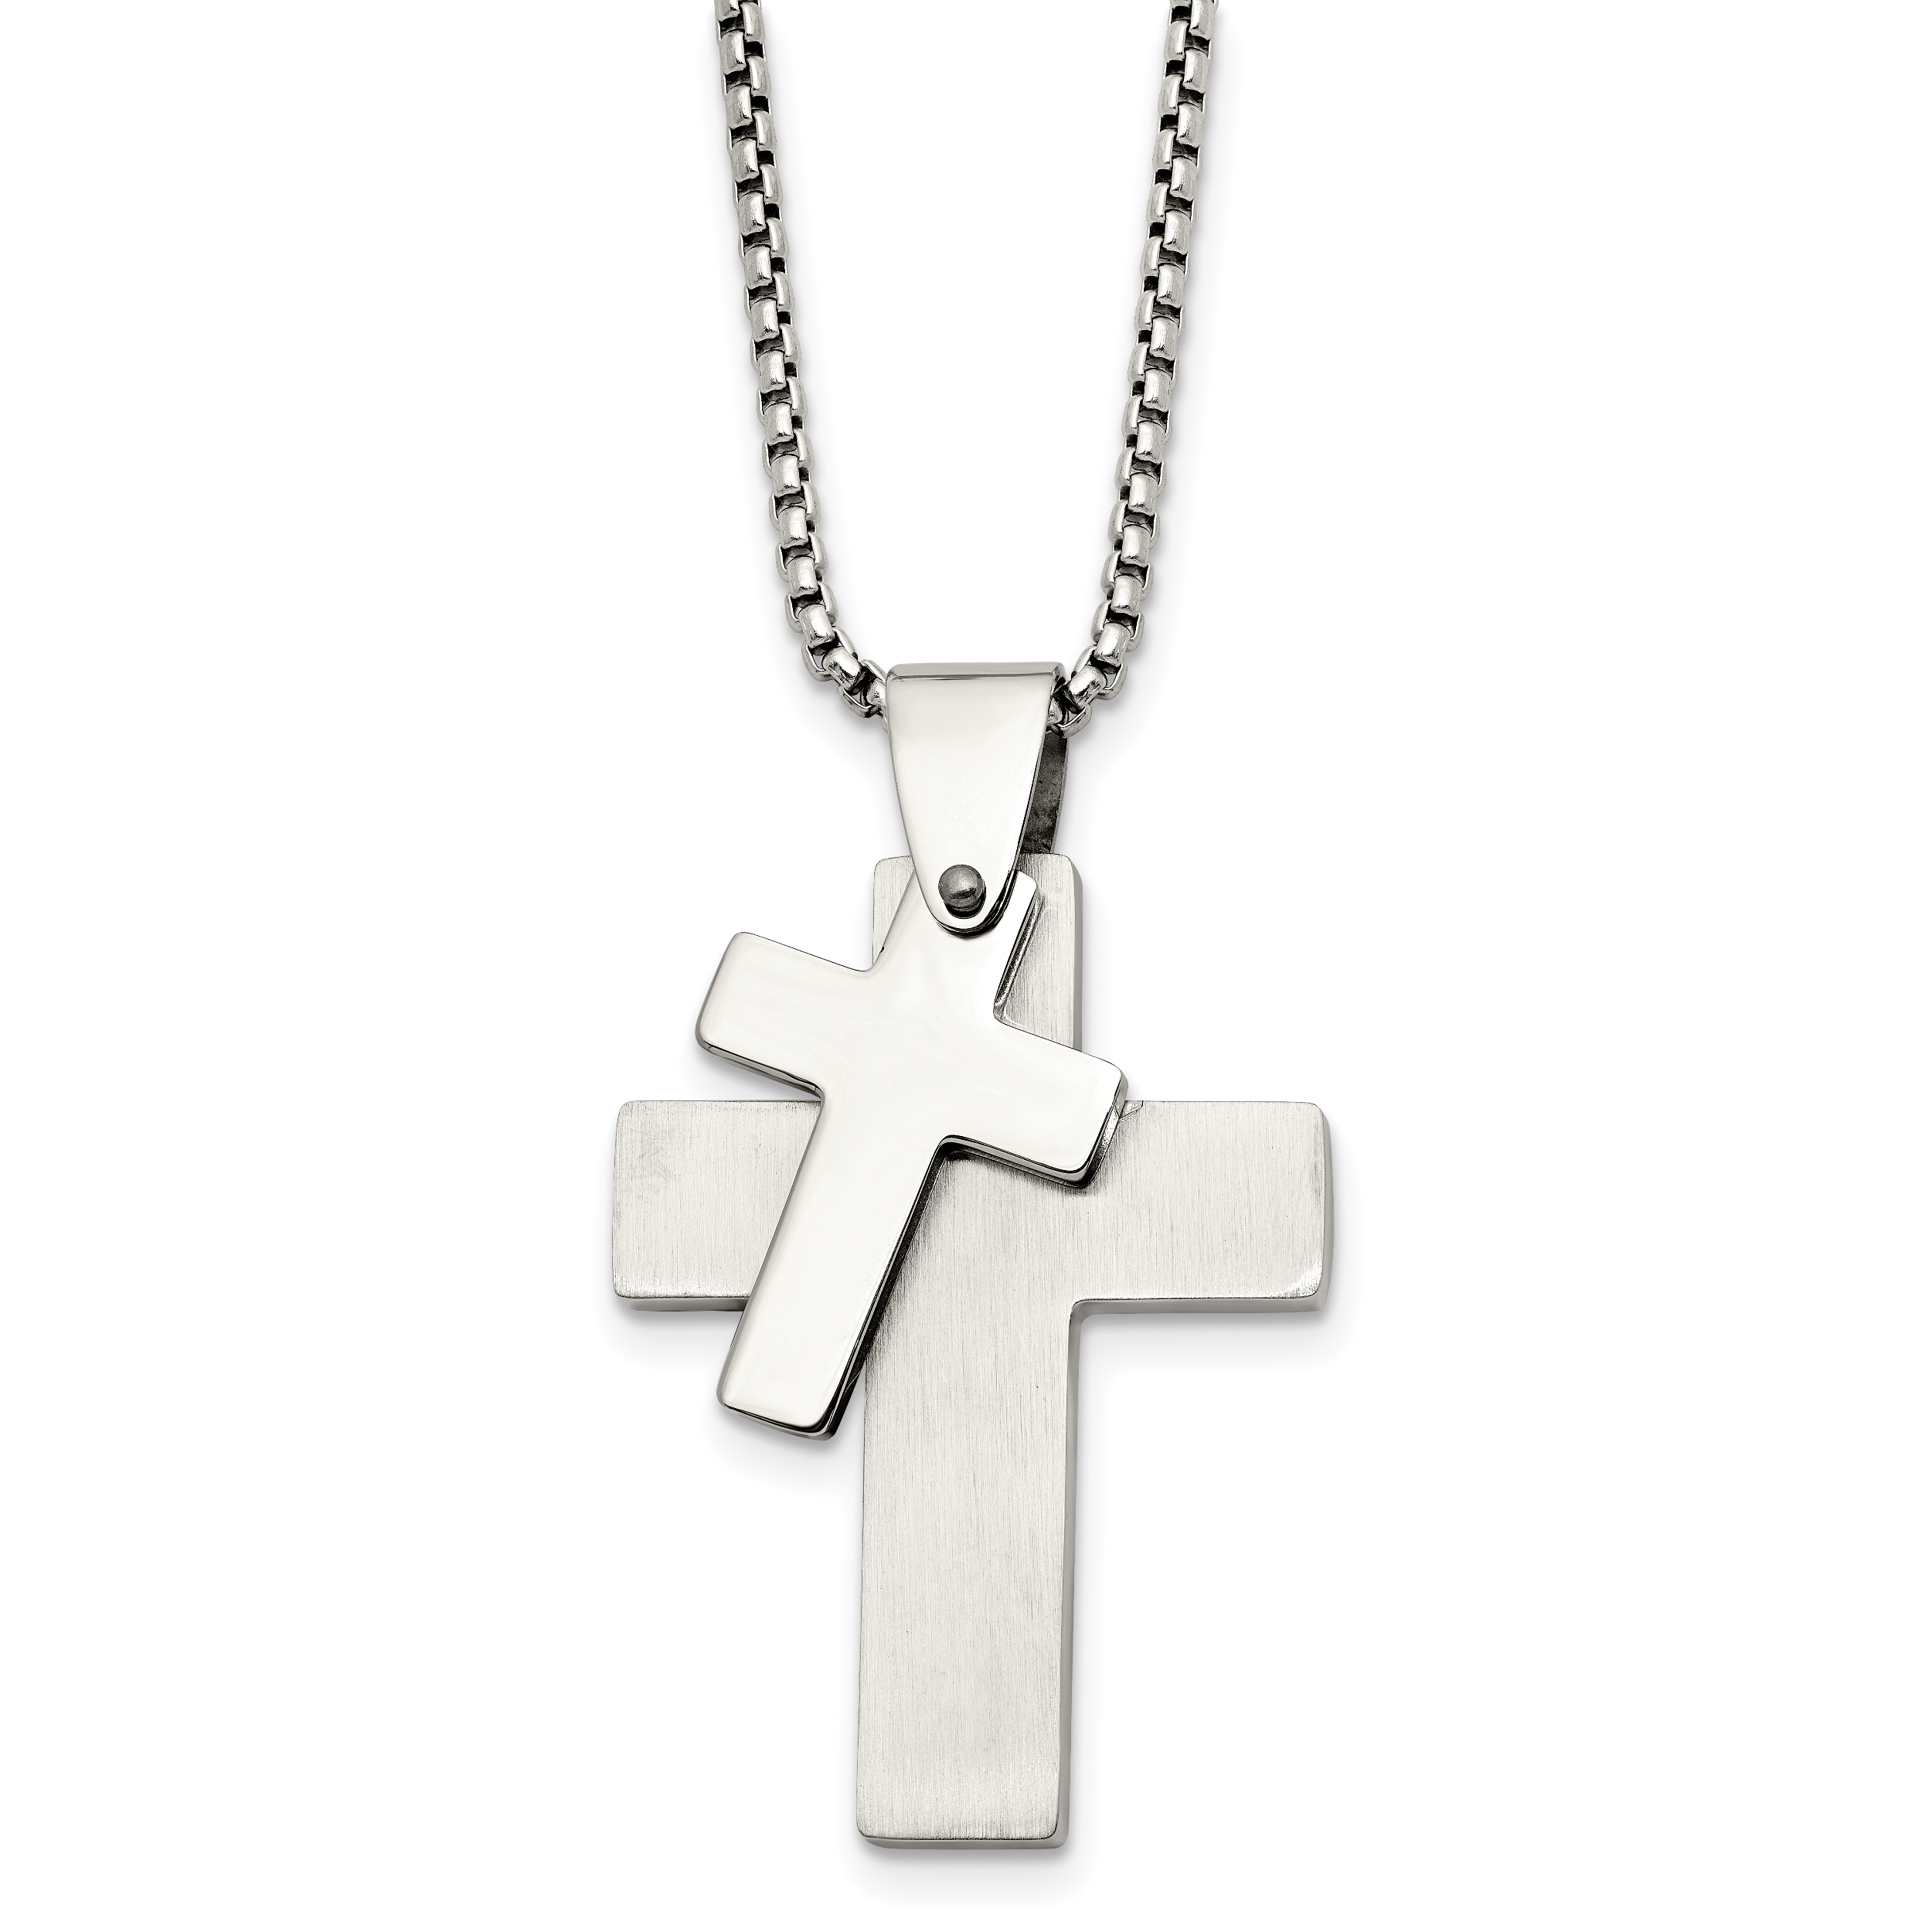 St Benedict Cross Necklace – Love and Honor Jesus